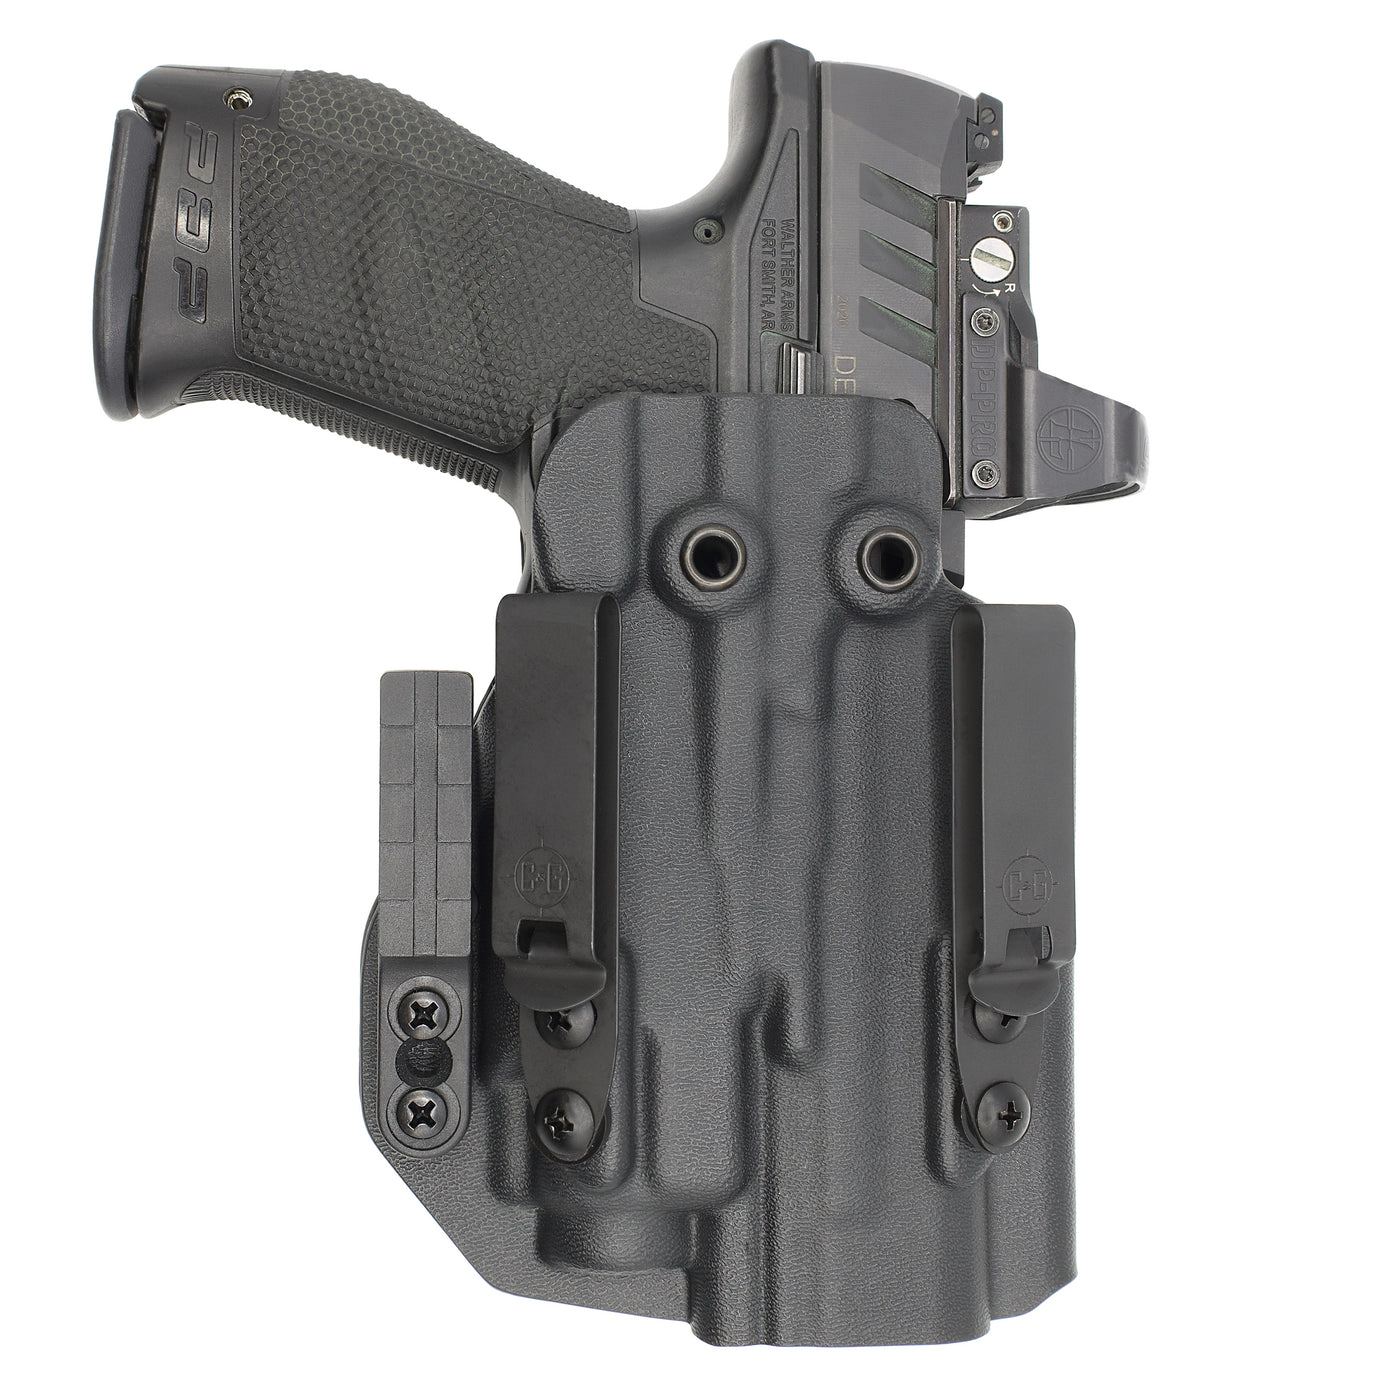 C&G Holsters custom IWB ALPHA UPGRADE Tactical M&P 9/40 streamlight TLR8 holstered